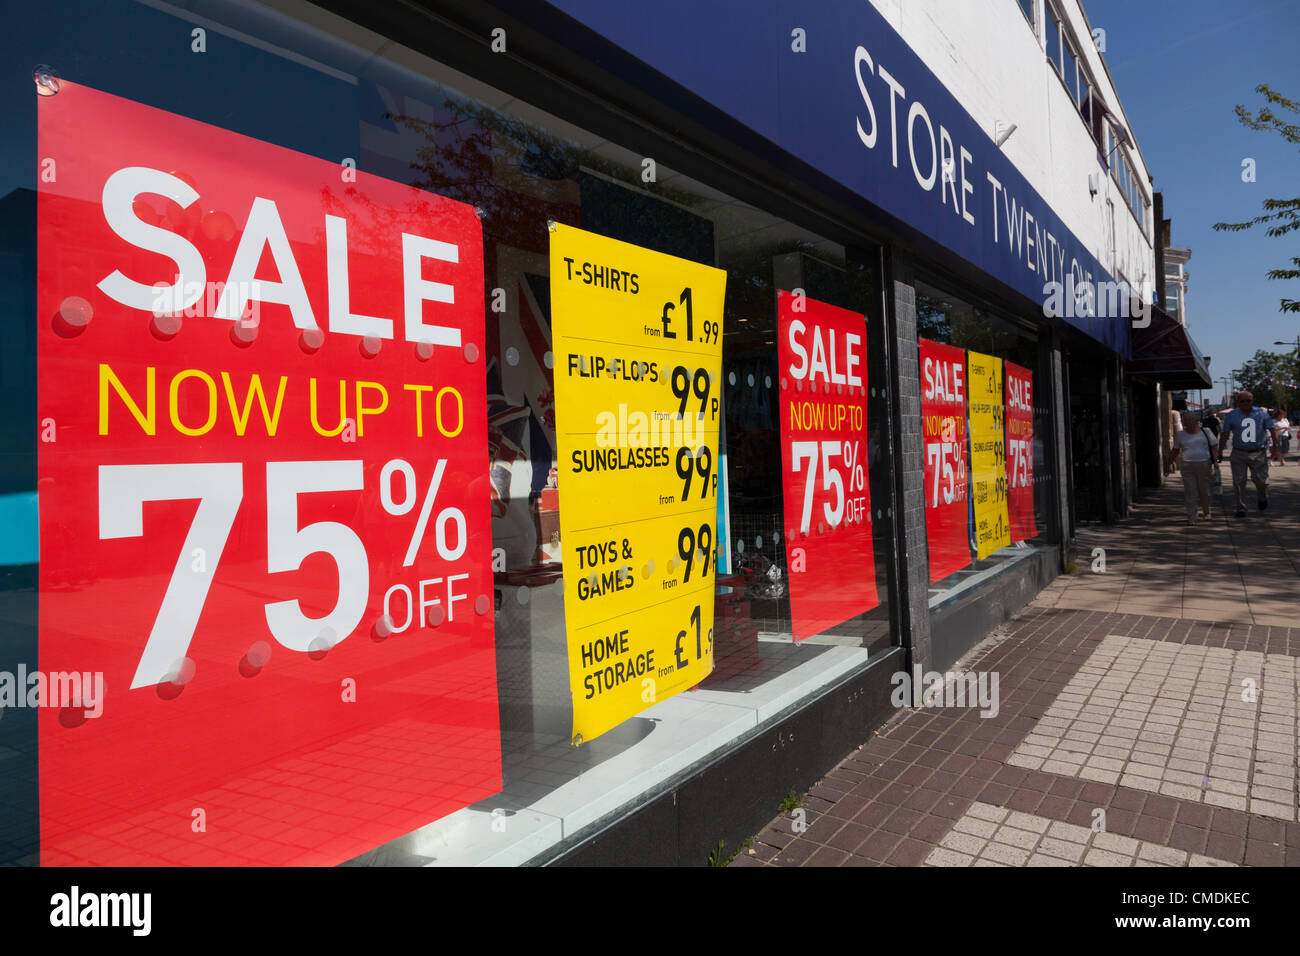 England 25 July 2012. recession hit high street discounts and closures. Massive sales to attract customers. Stock Photo